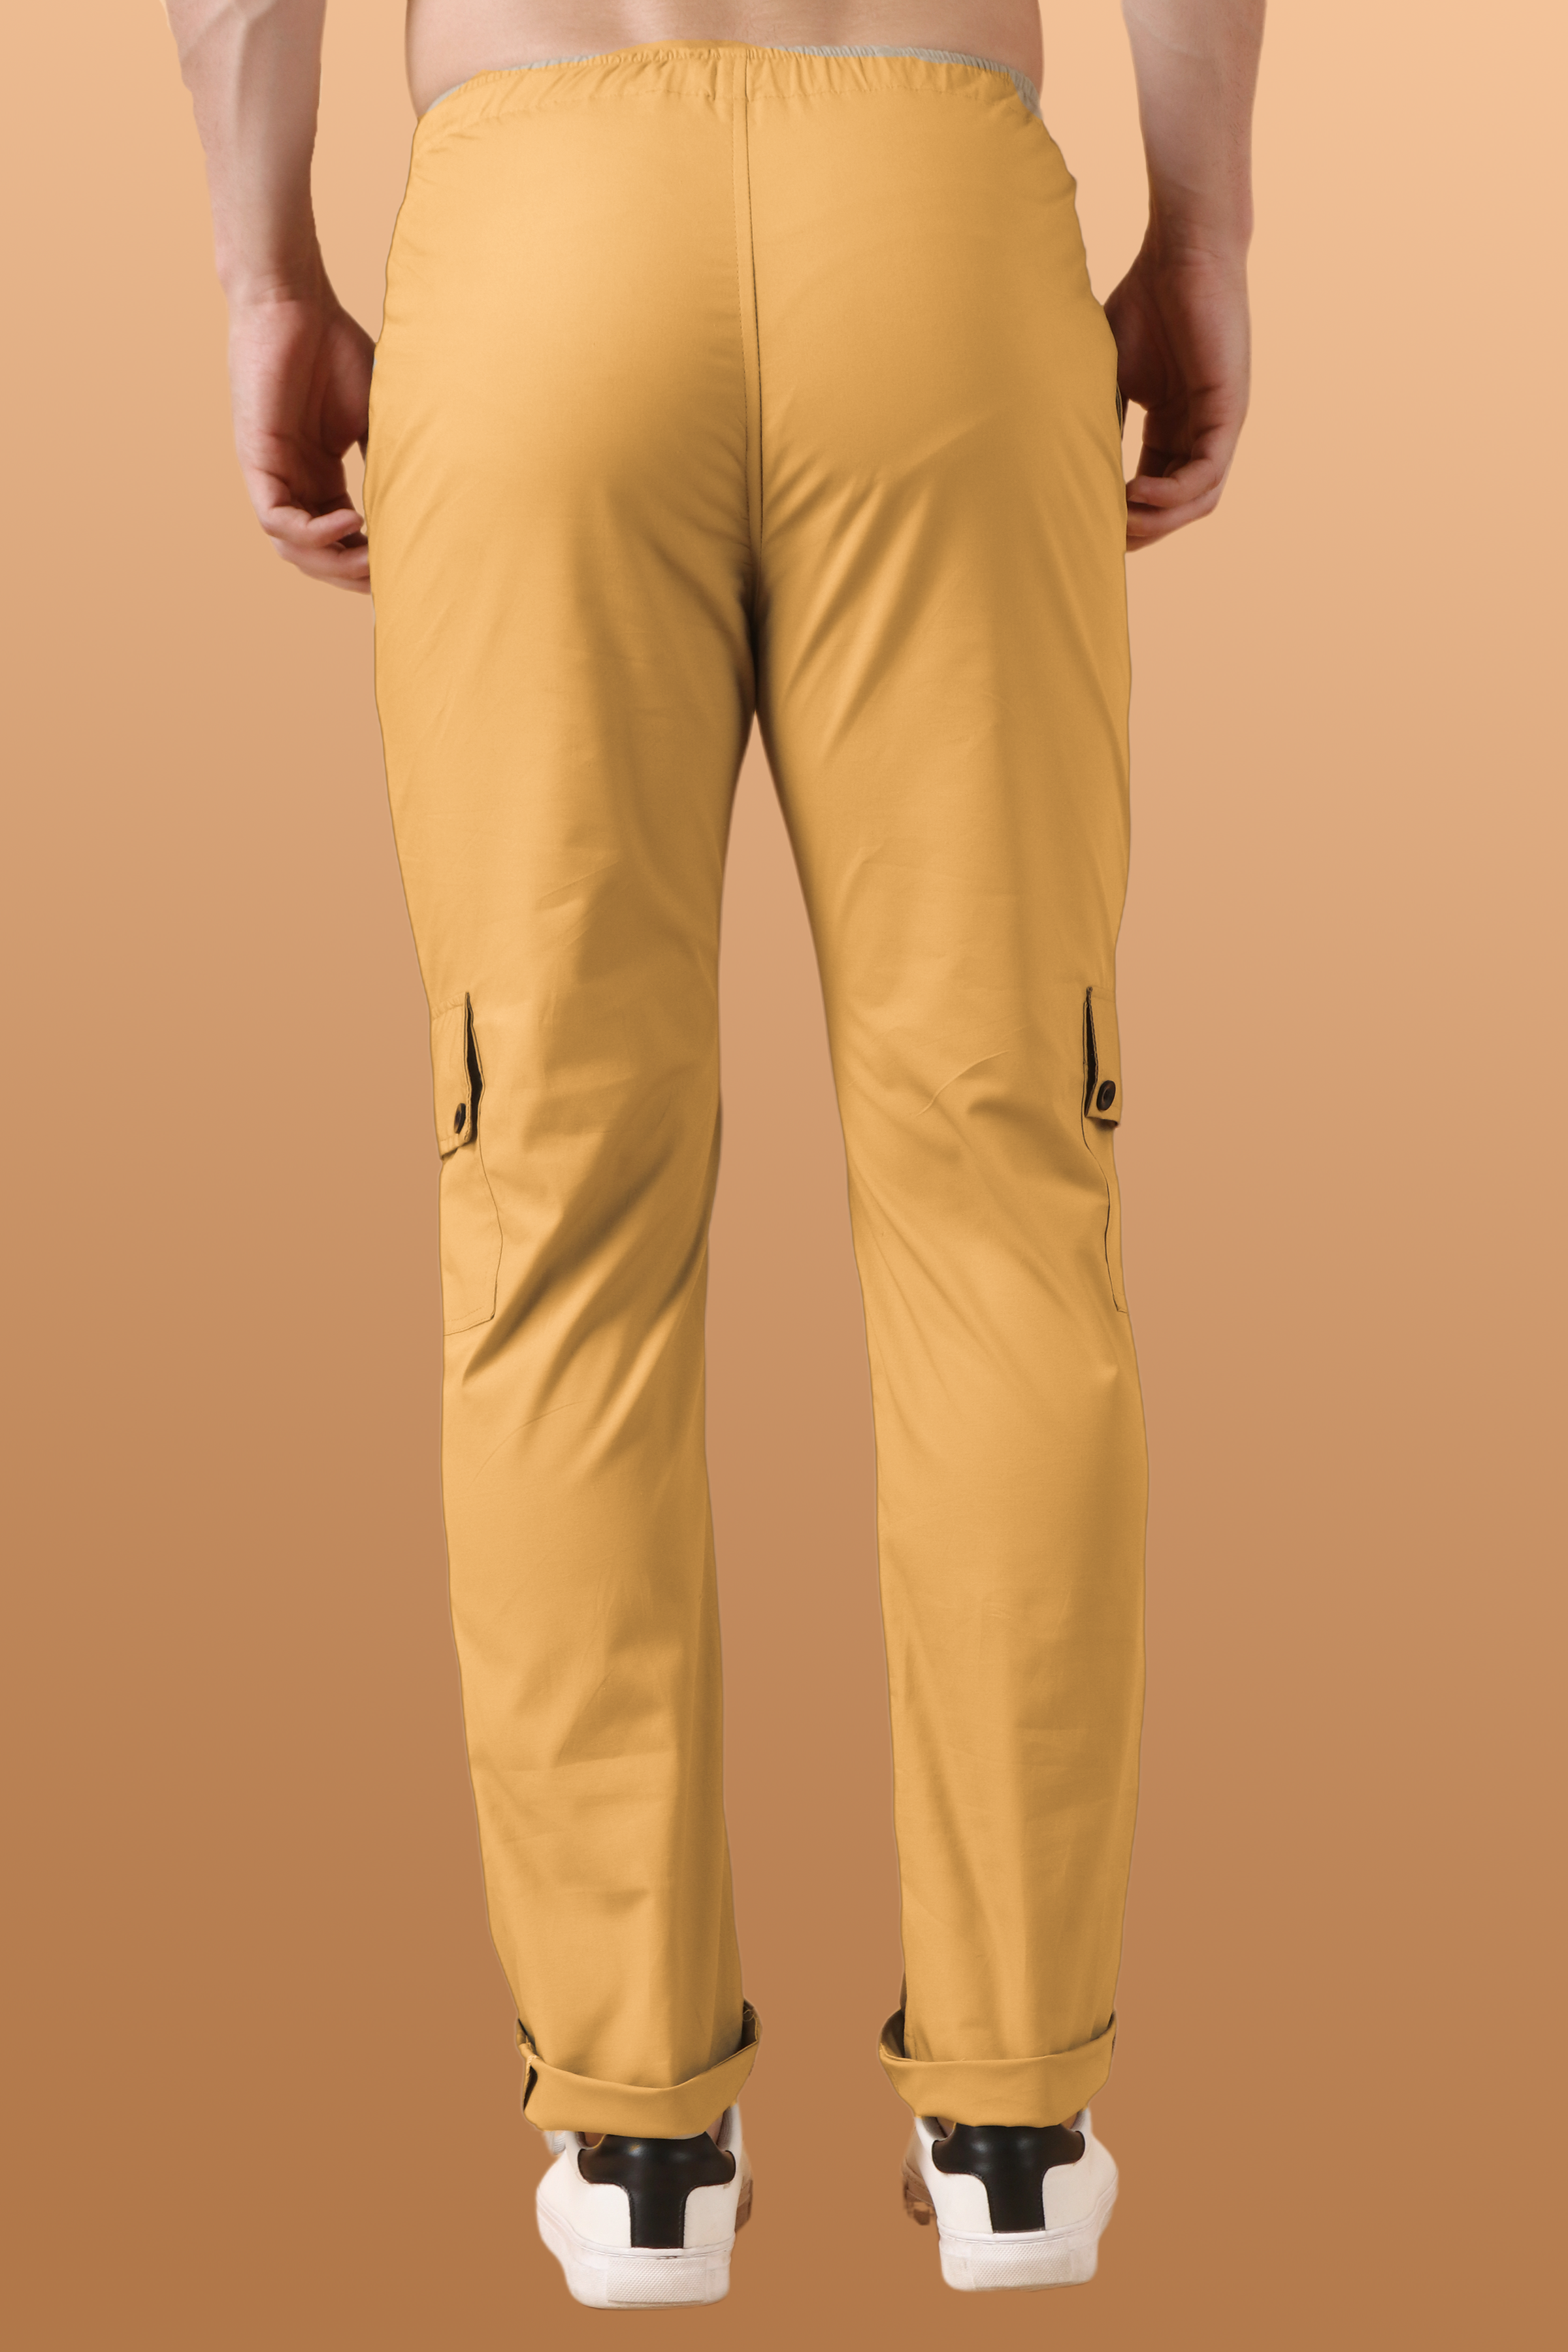 Get On My Level Parachute Pants  Taupe Cargo Pants